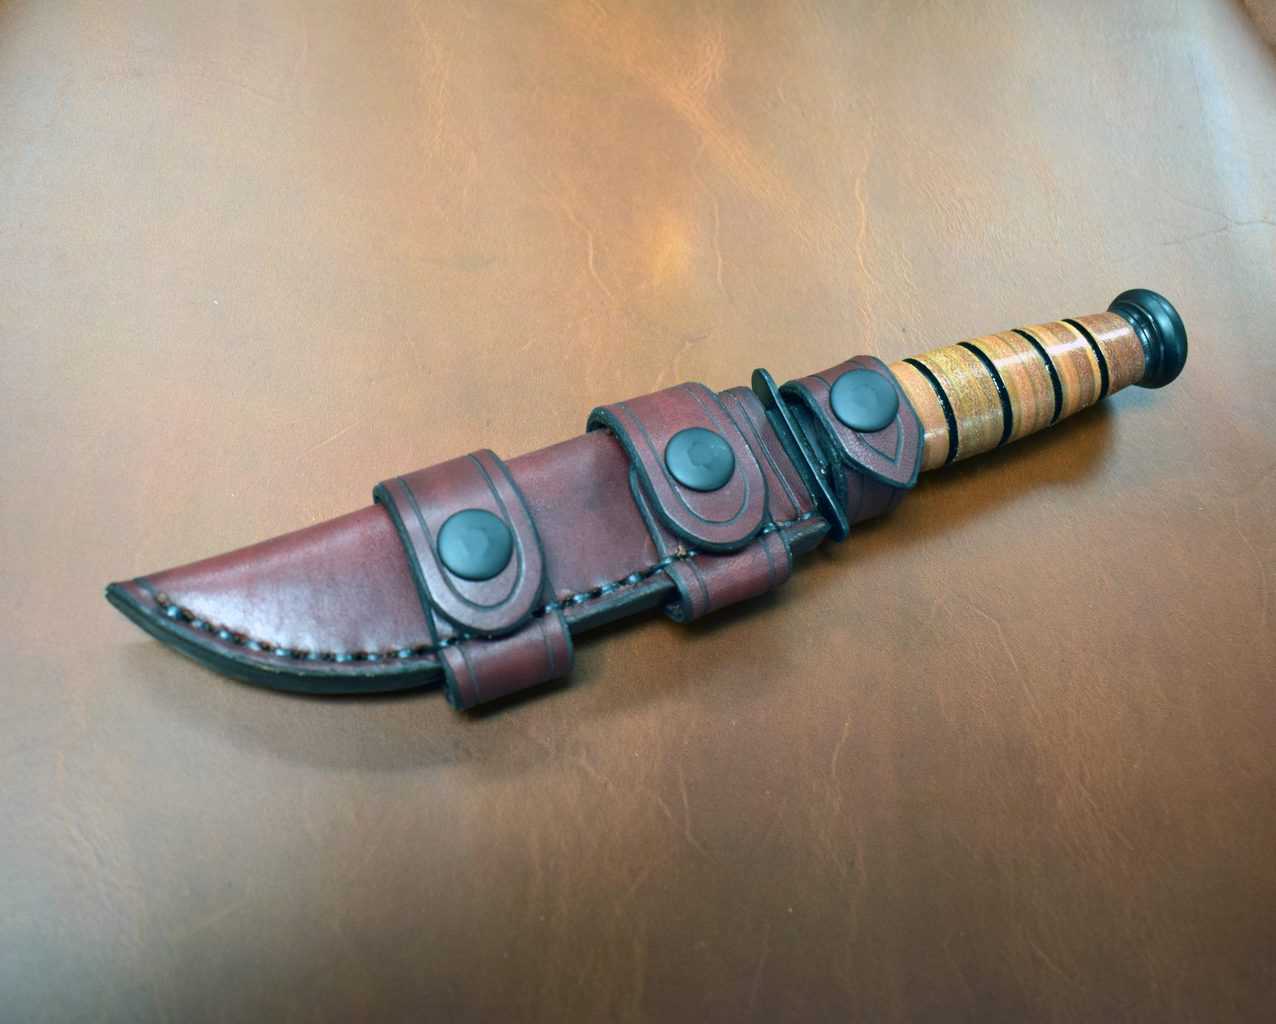 Leather Scout Sheath for the Short Ka Bar Fighting Knife